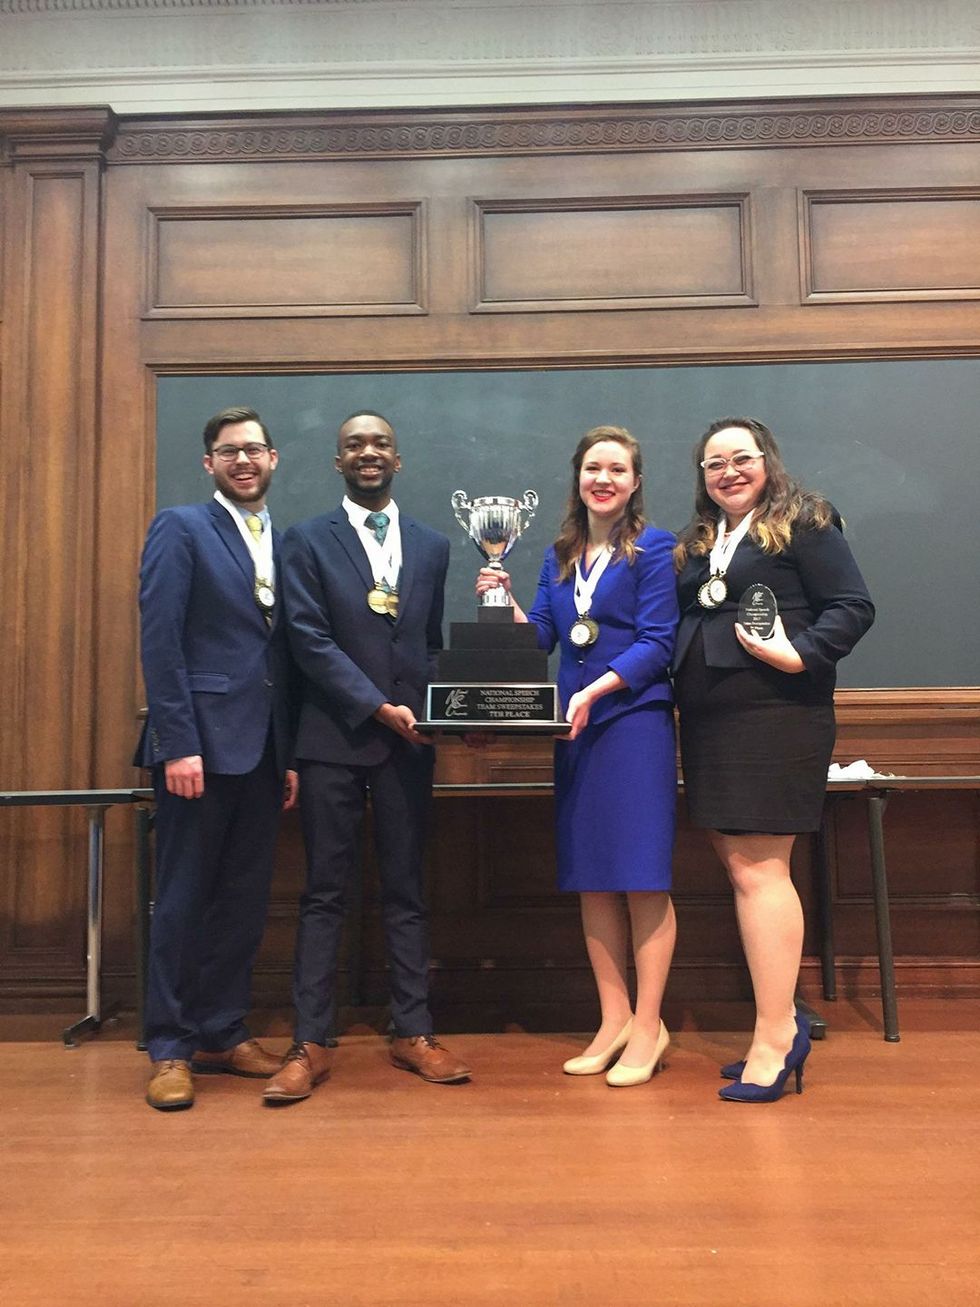 Why The National Speech Championship Meant The World To Our Small Team